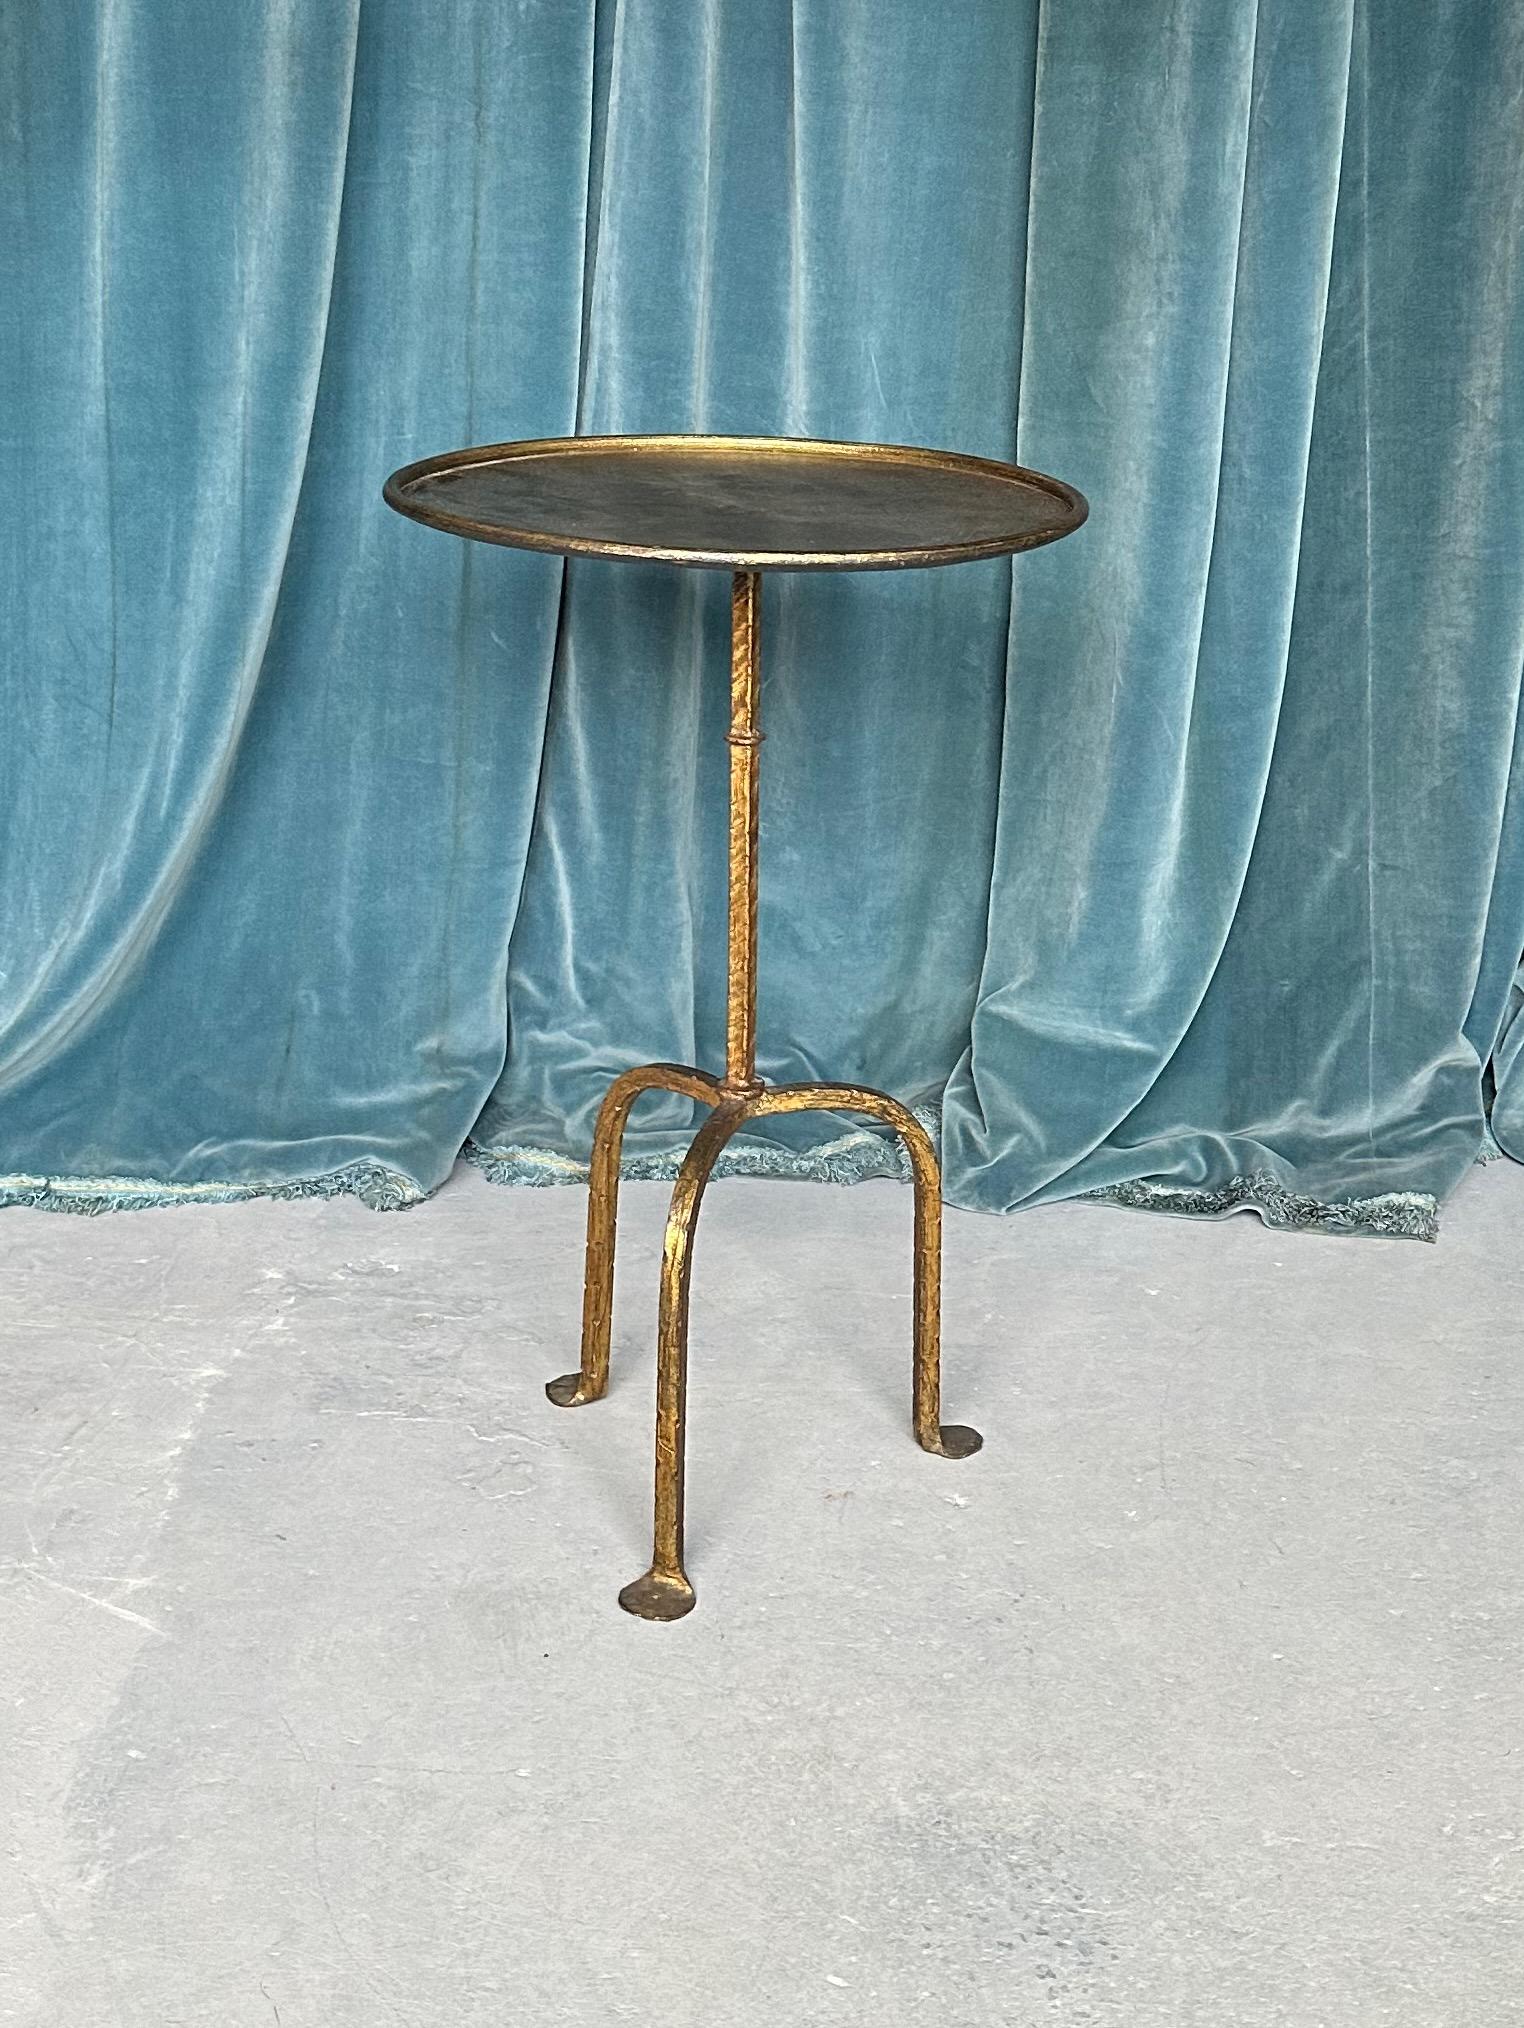 This small scale side table is ideal for your favorite objects and books. And of course the perfect place for your morning coffee or end of day cocktail. Measuring 28 inches in height and 18 inches in diameter, this graceful side  table is part of